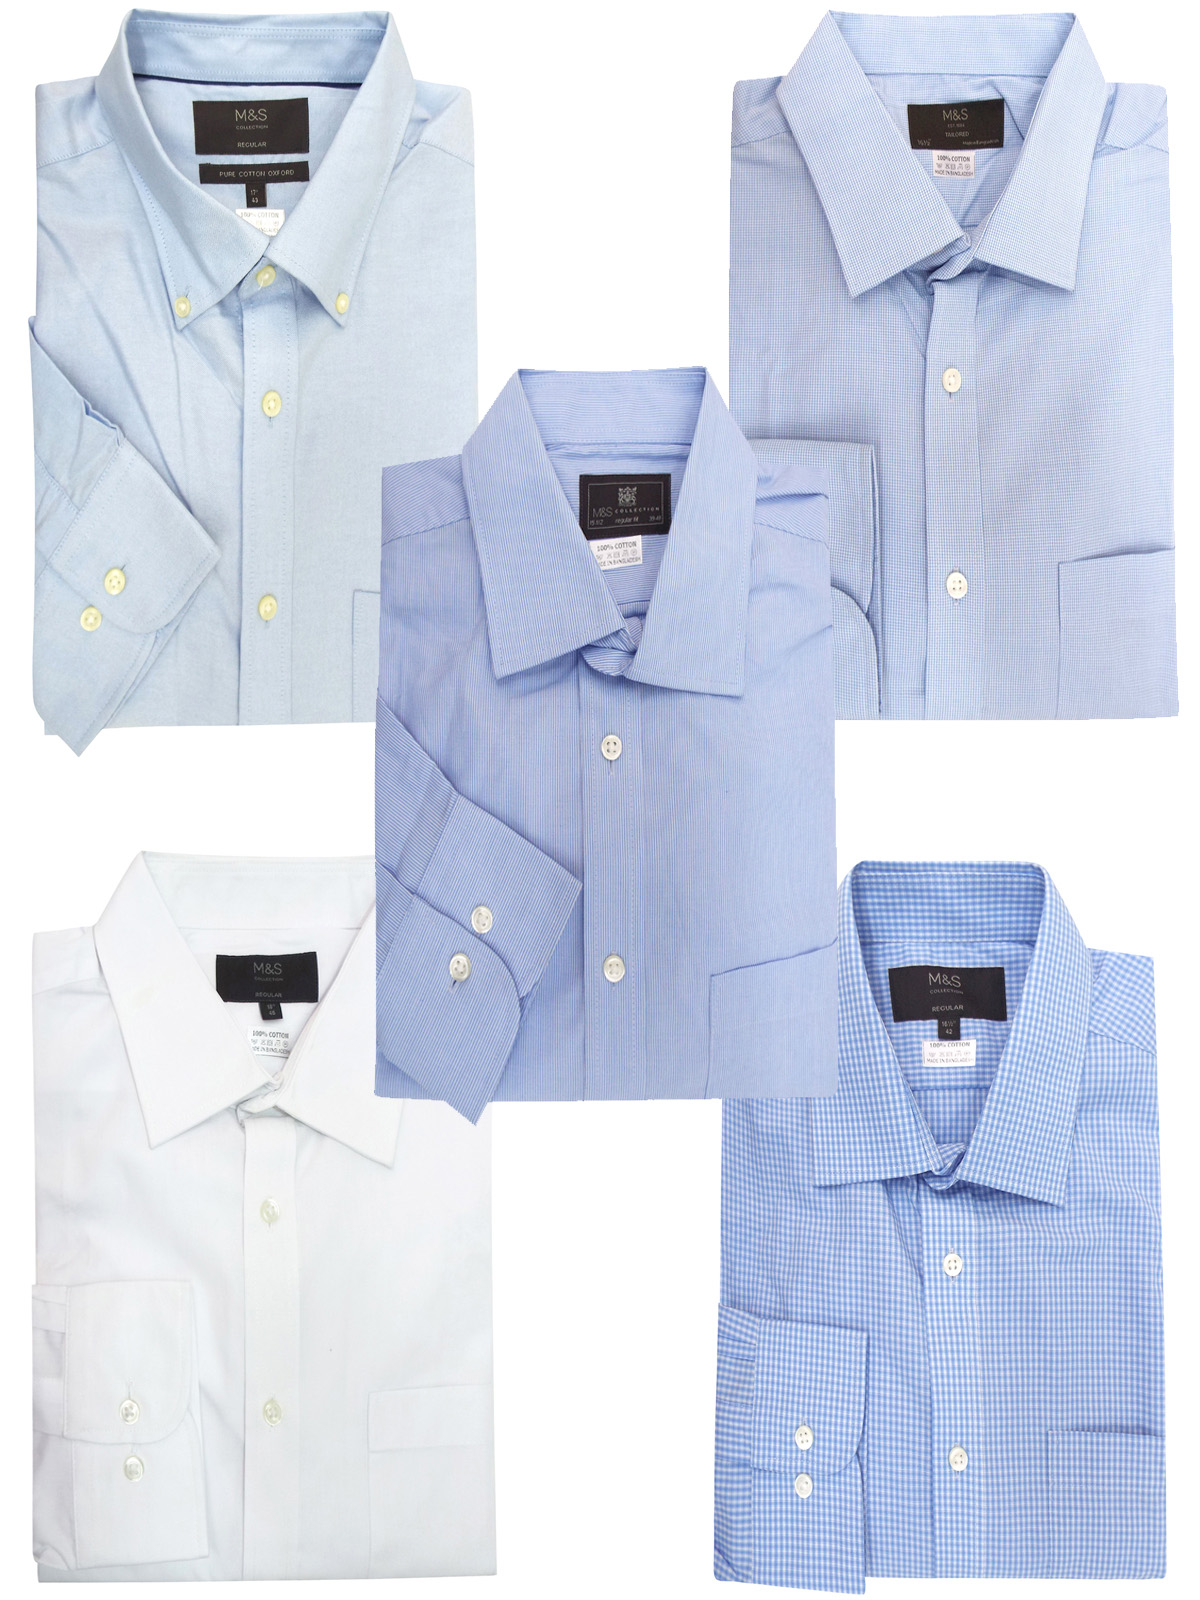 Marks and Spencer - - M&5 ASSORTED Long Sleeve Shirt - Collar Size 15.5 ...